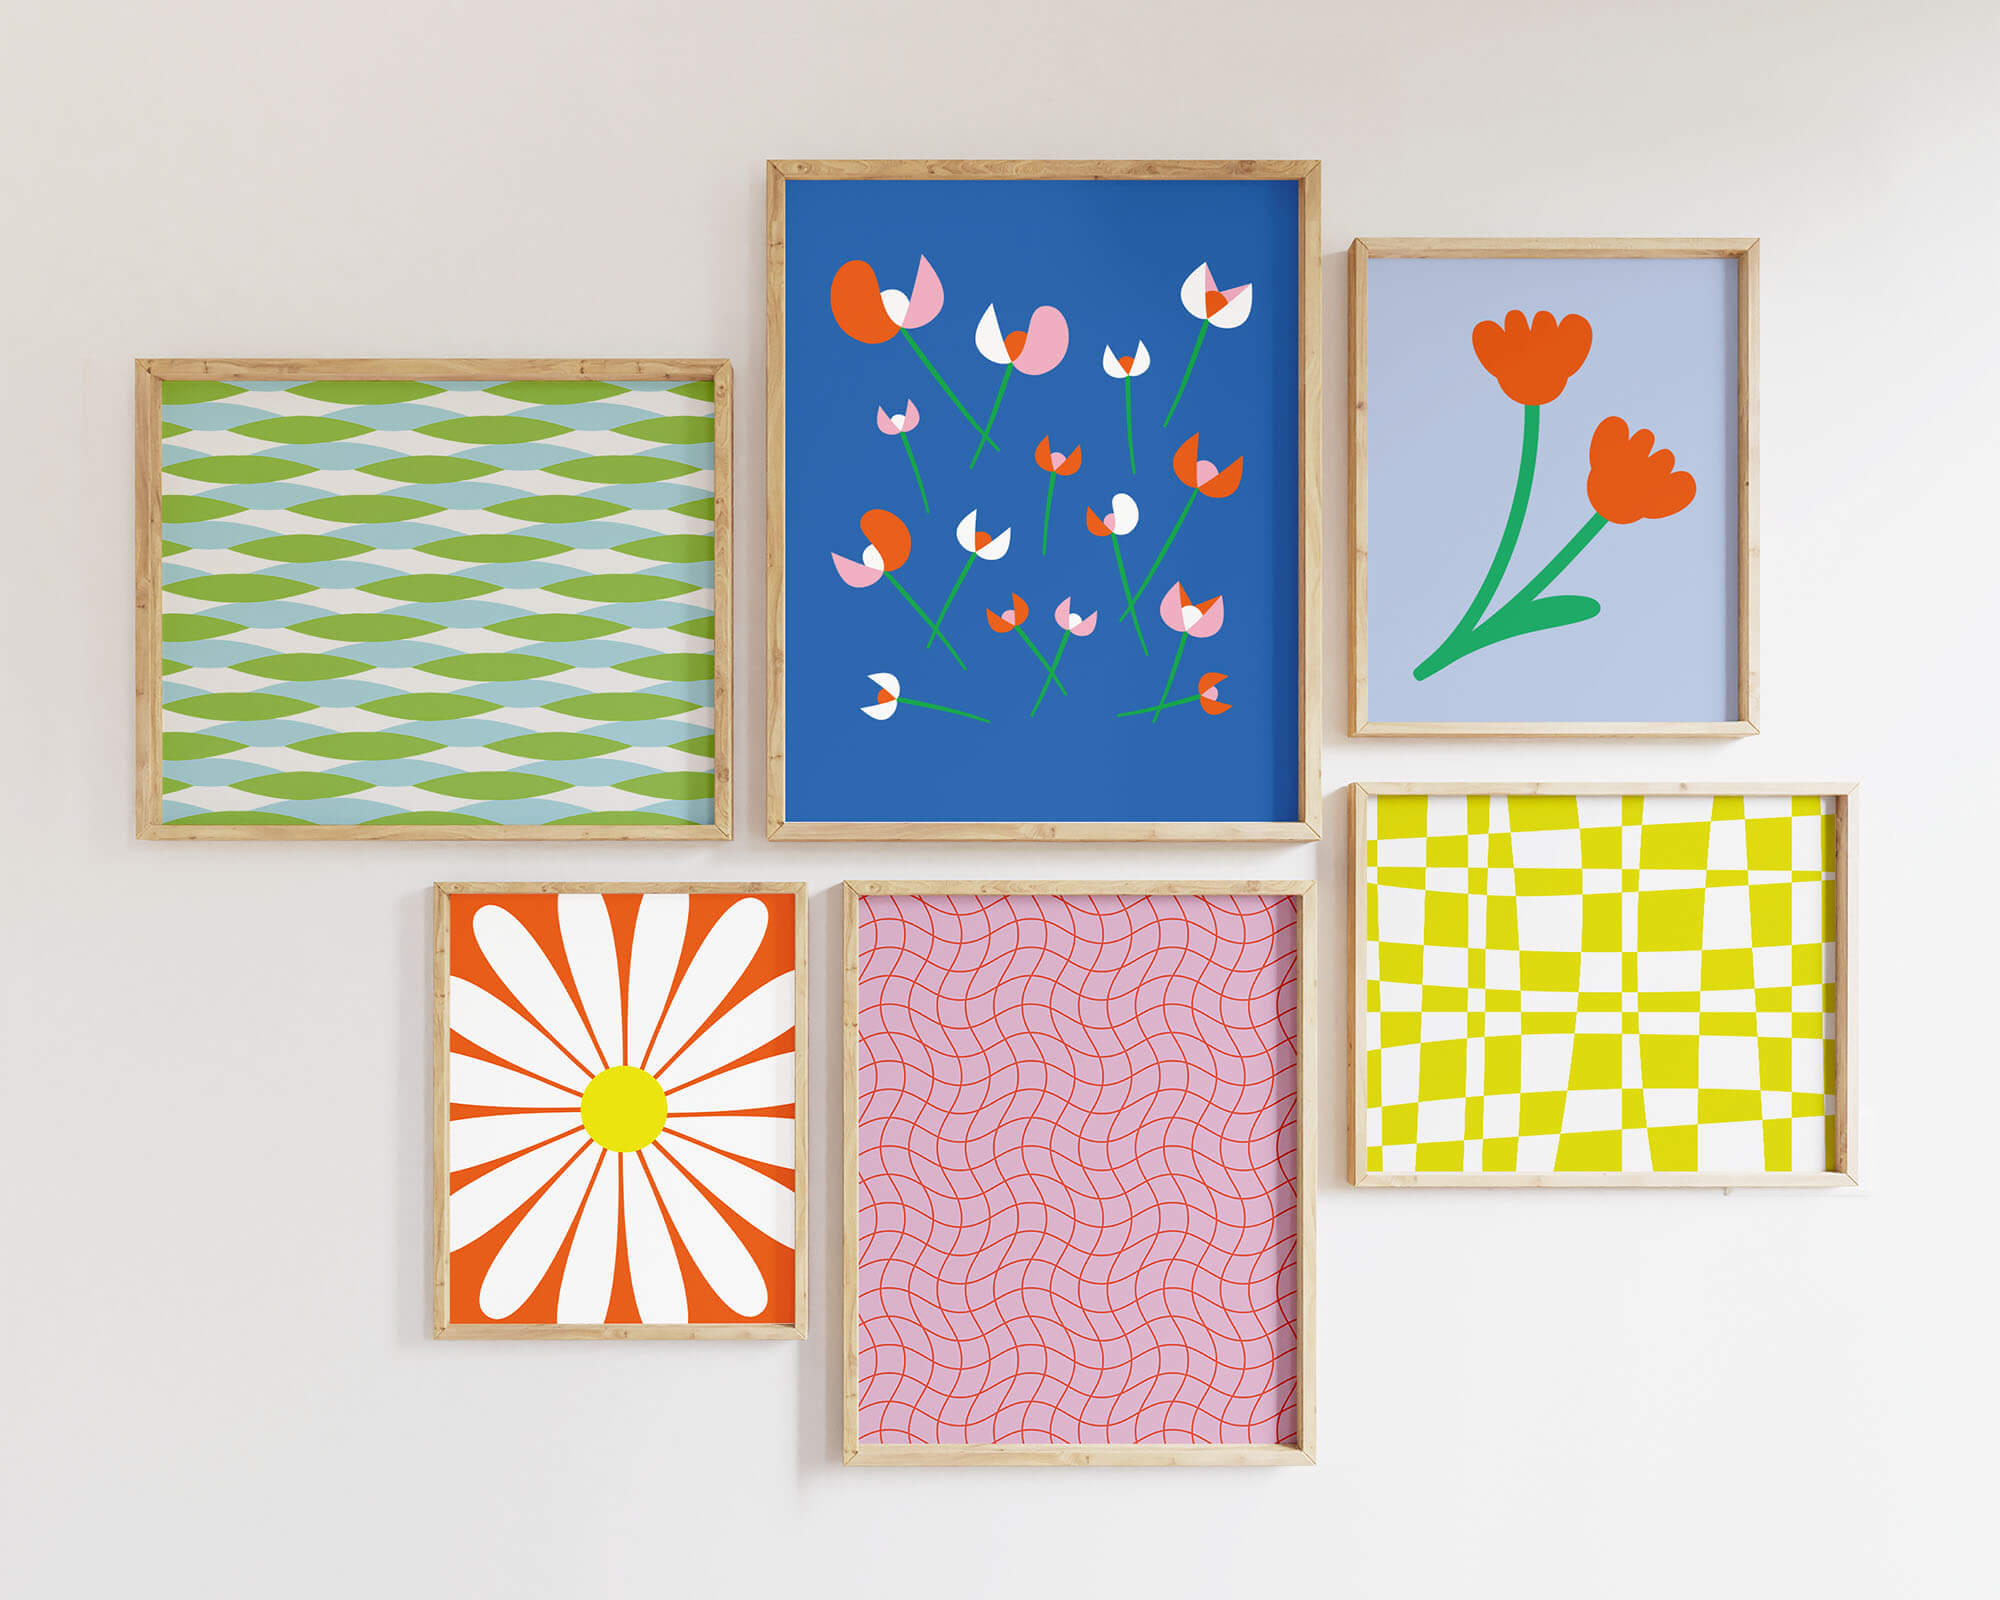 Contemporary gallery wall of graphic modern abstract and checkerboard patterns and modern floral. Graphic, bold, vaguely mid-century inspired art. Made in USA by My Darlin' @mydarlin_bk